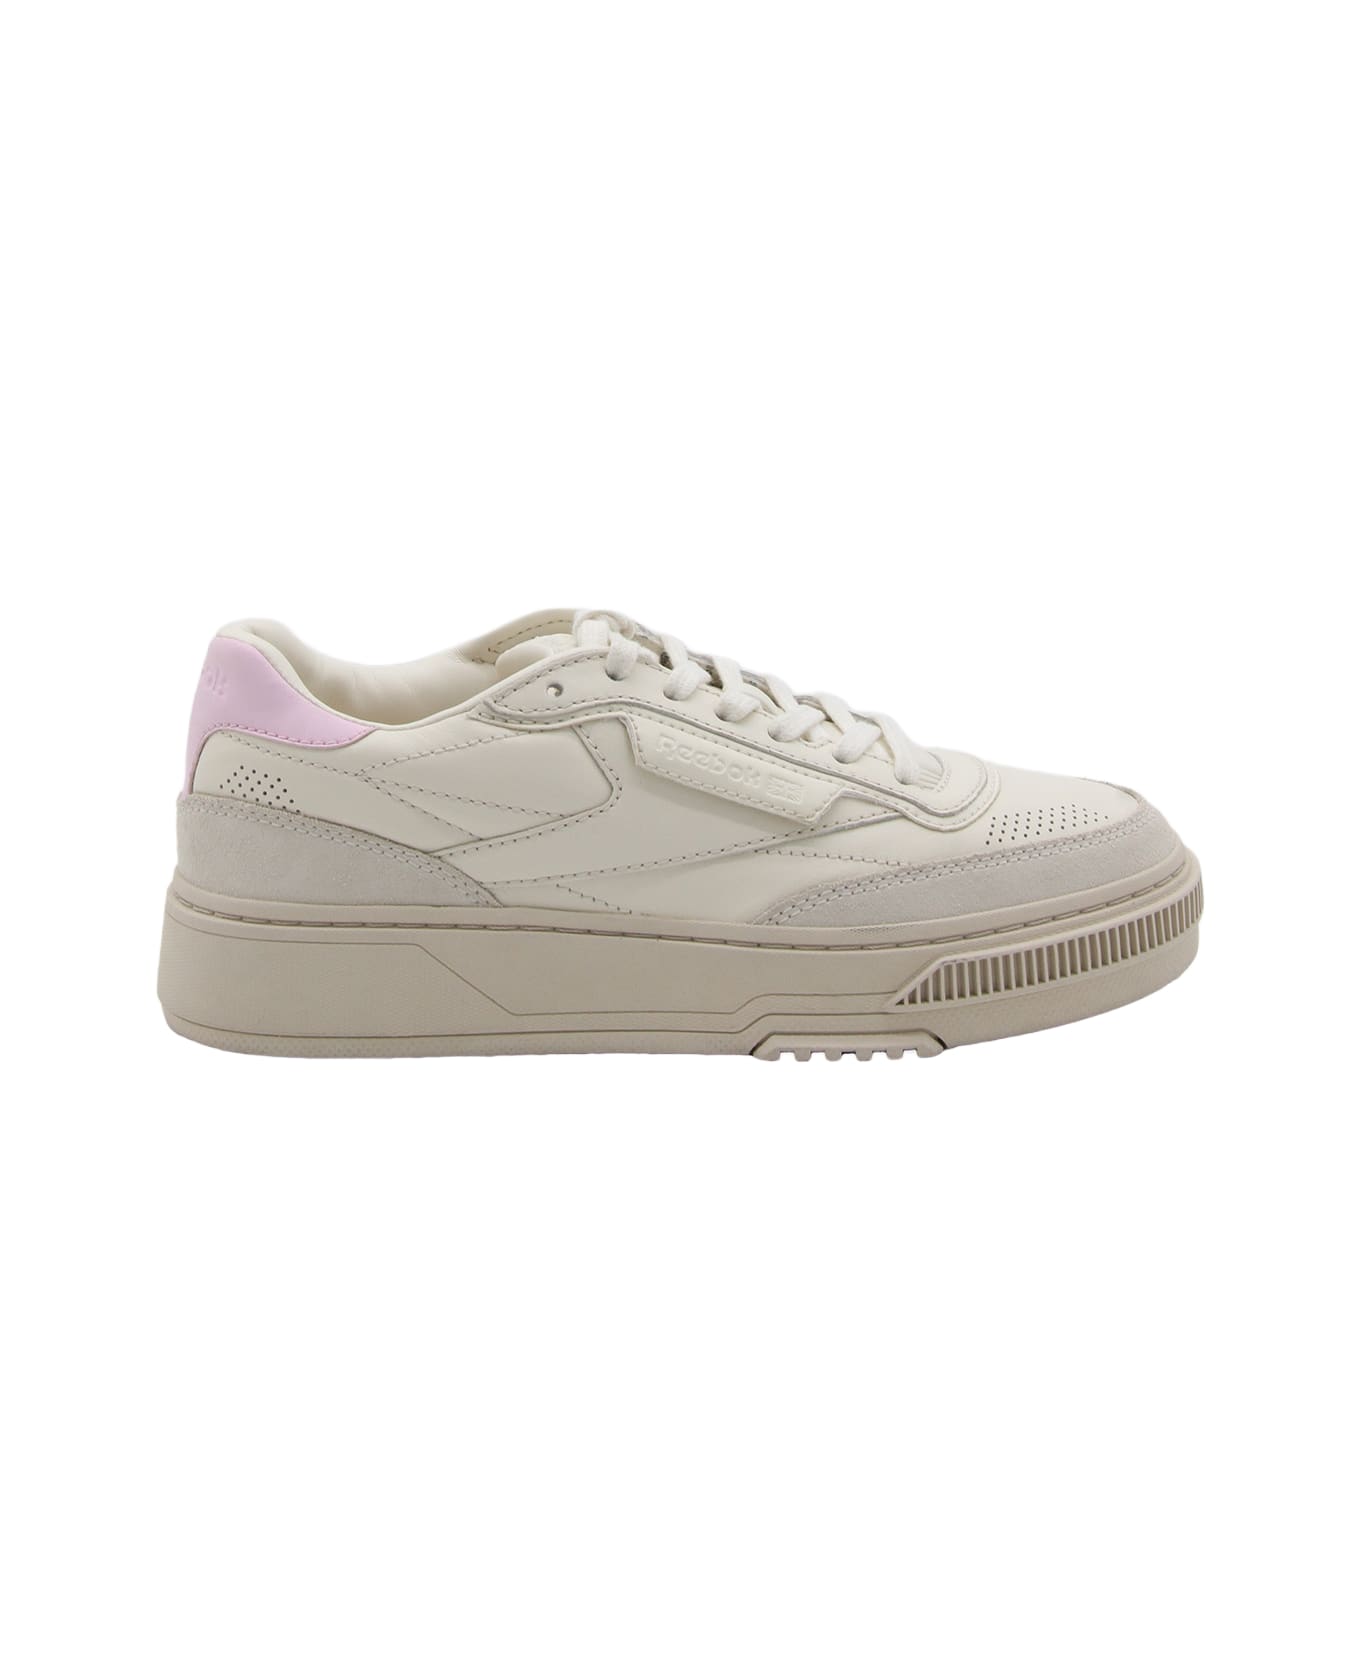 Reebok White And Pink Leather C Ltd Sneakers - White